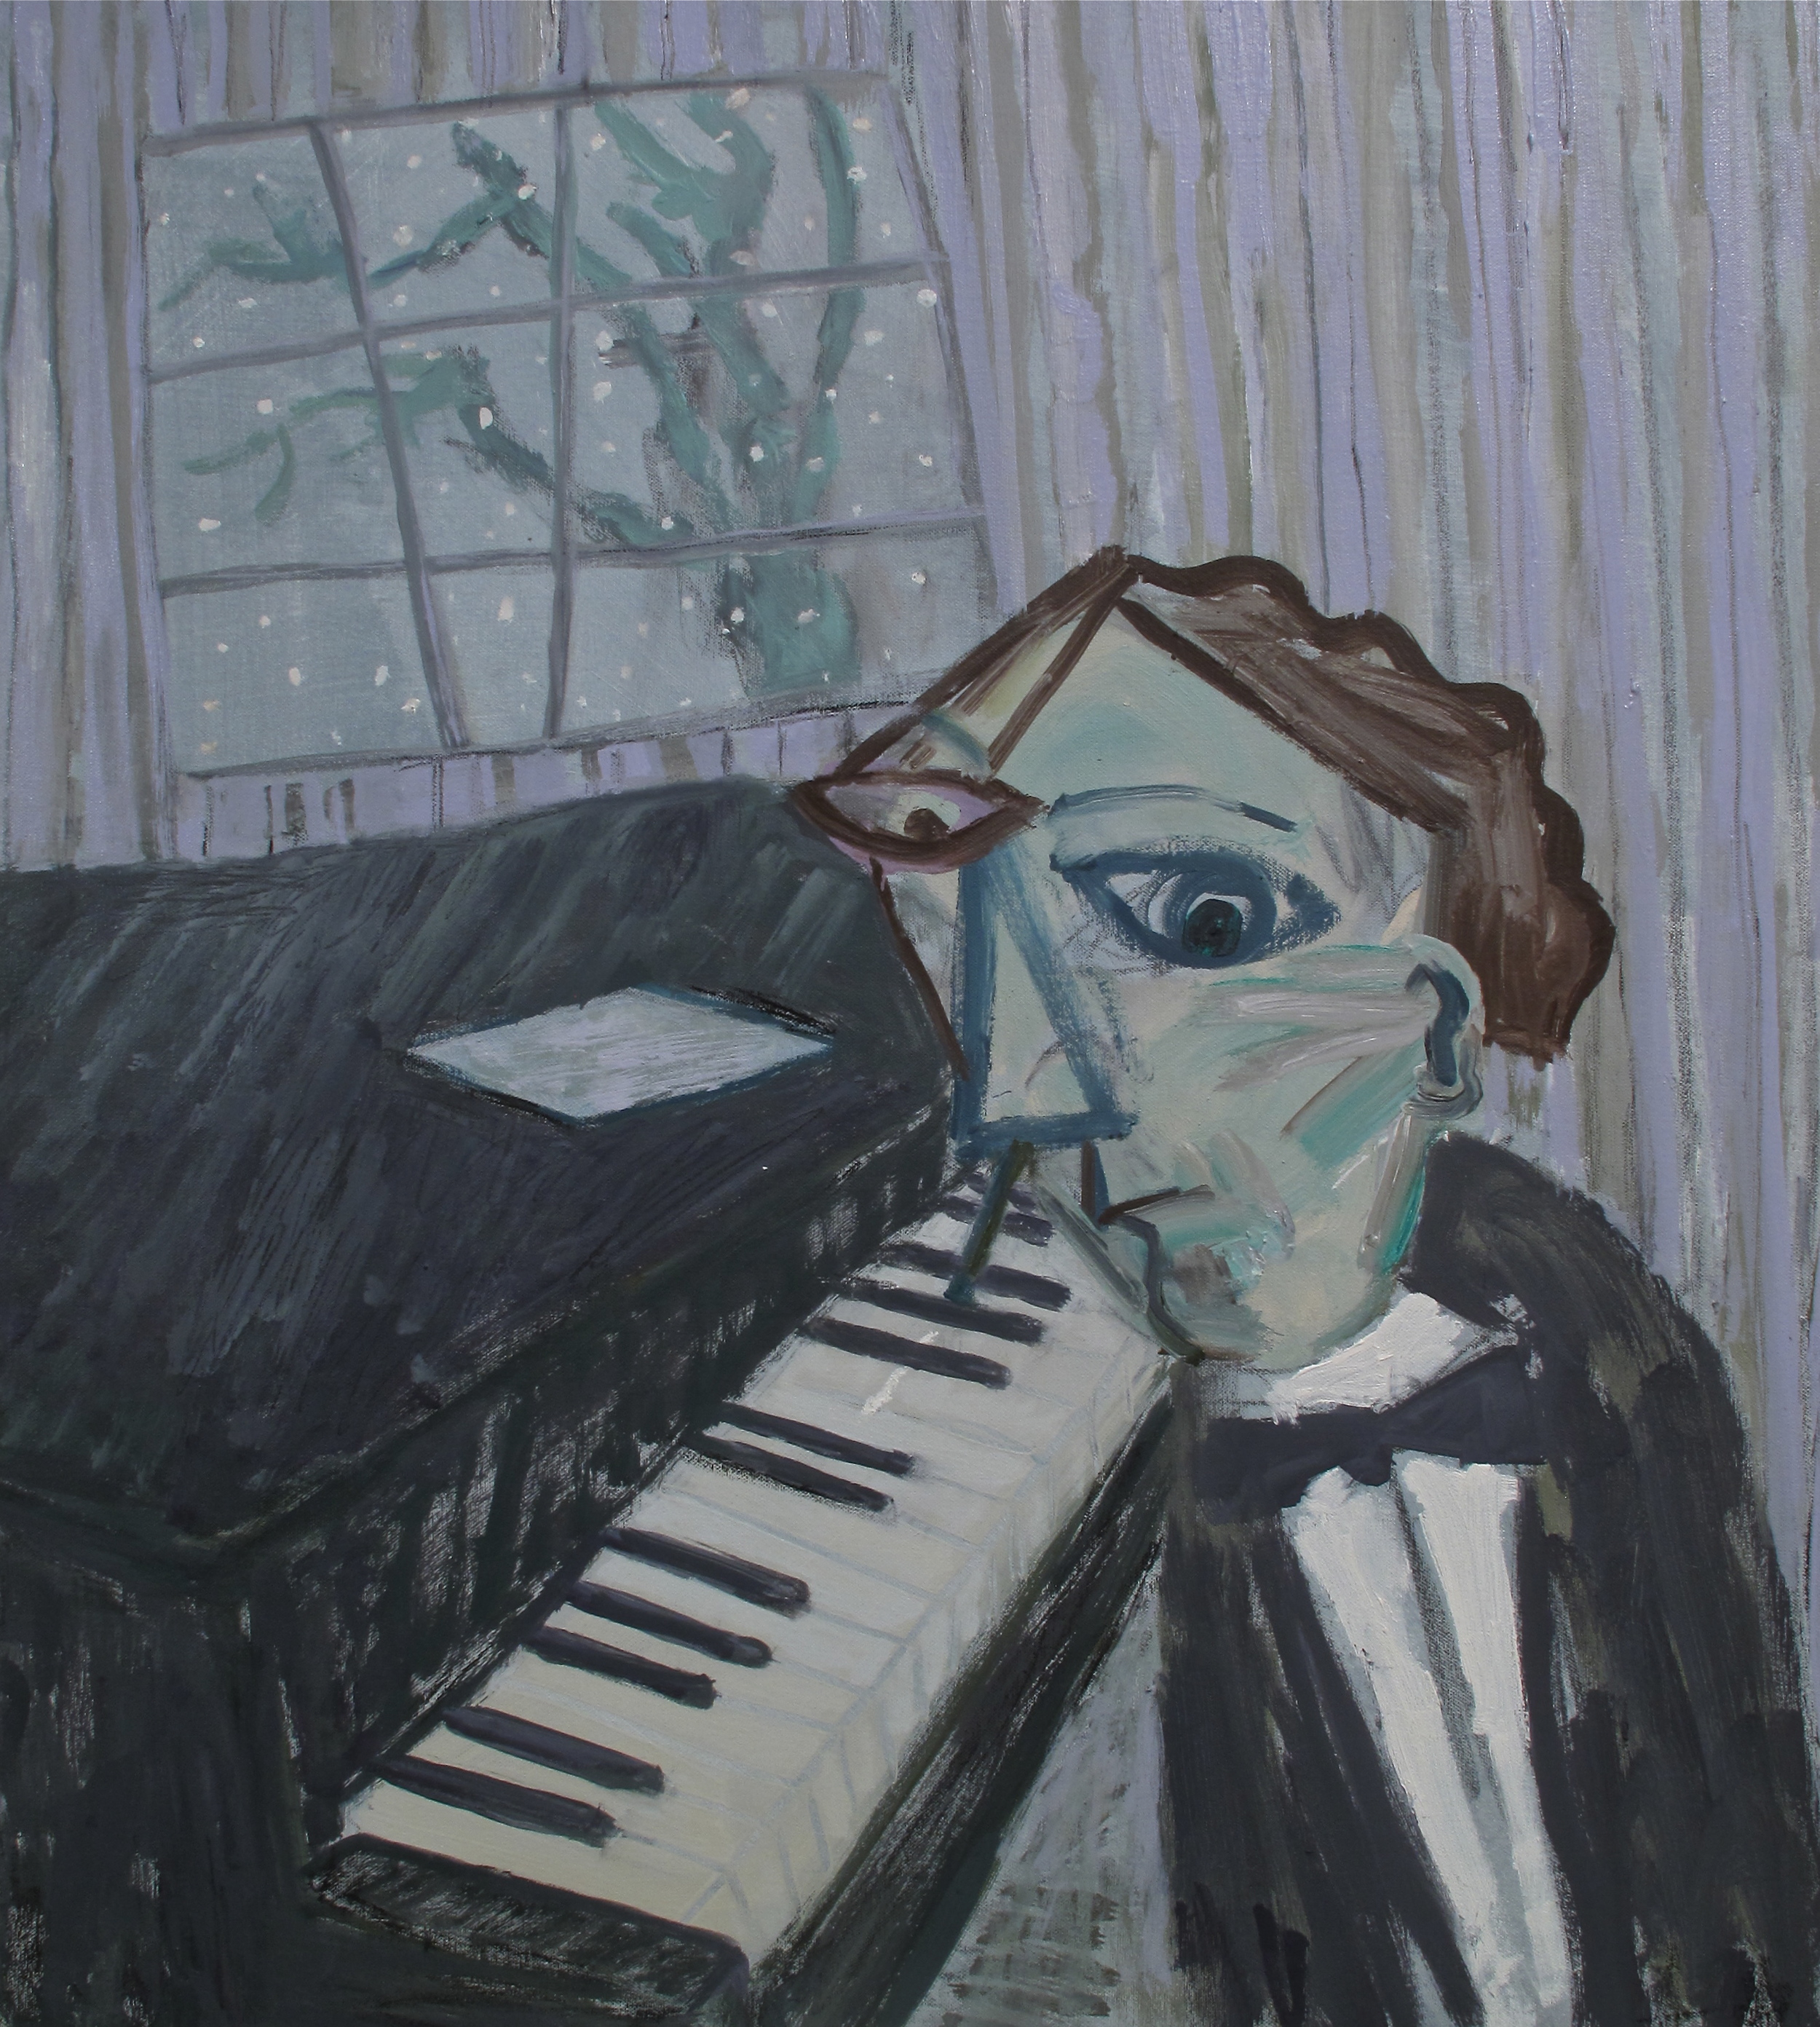  The Pianist 27”x24” oil on canvas 2011 